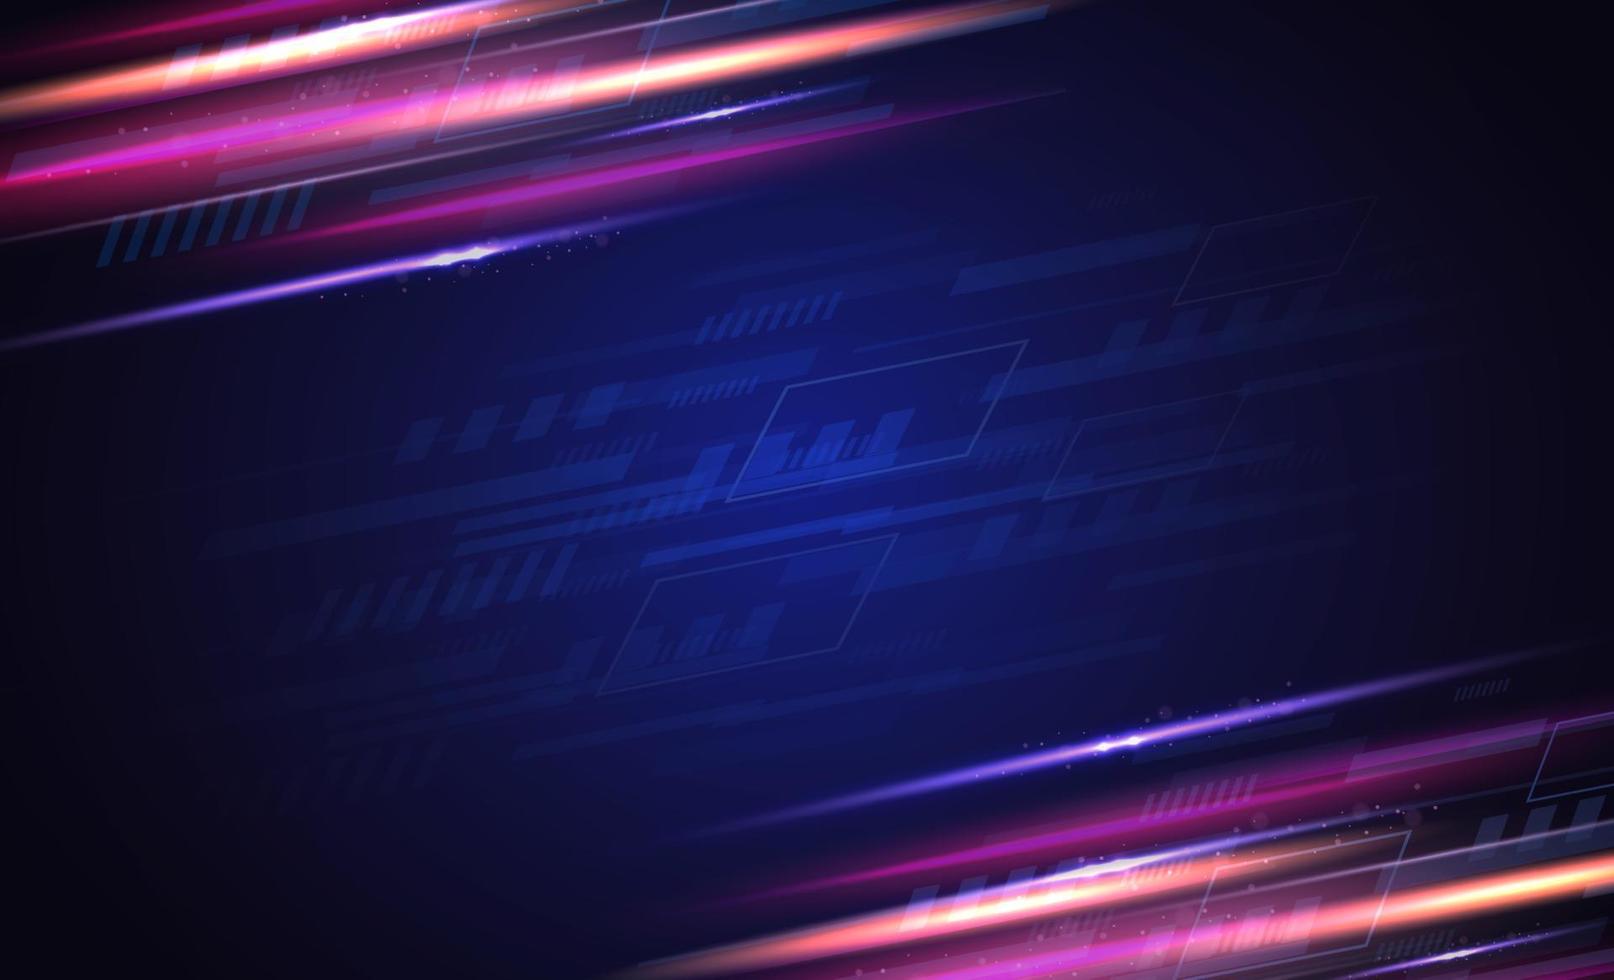 Abstract lines of light moving overlapping at high speed.Colourful dynamic motion.Movement sport pattern for banner or poster design background concept.Vector illustration vector